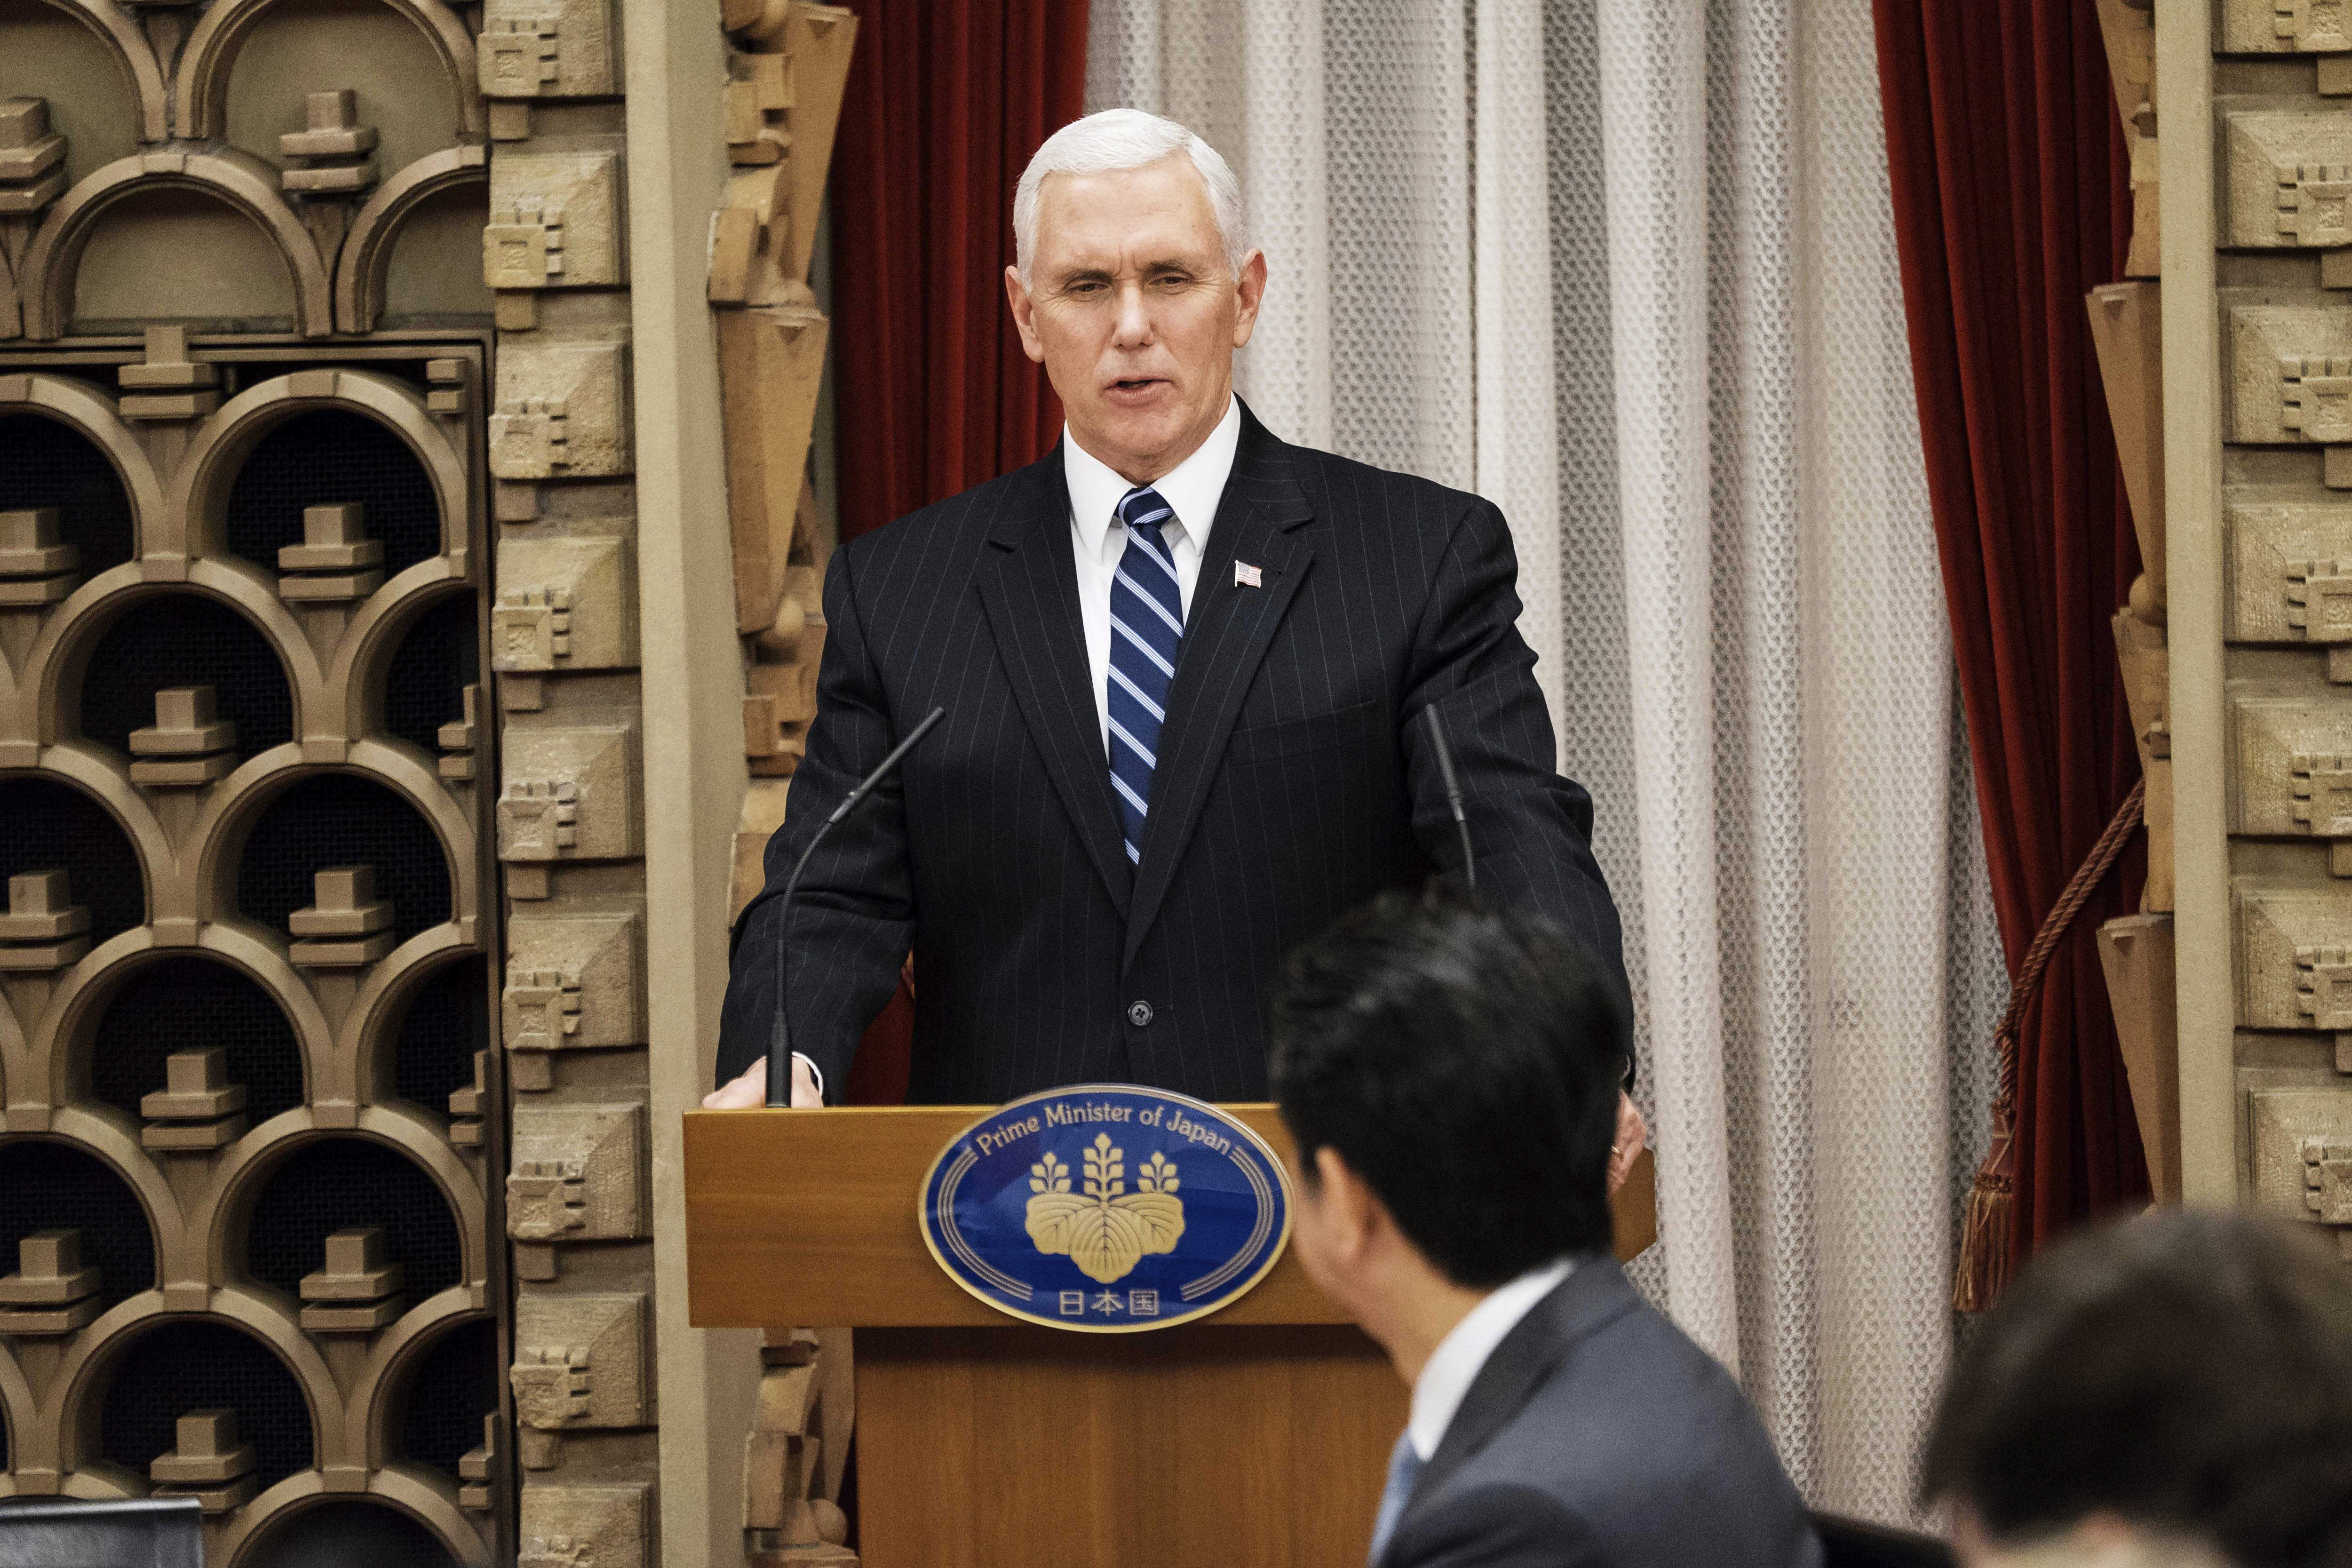 US to impose 'toughest ever' sanctions on North Korea, Pence warns